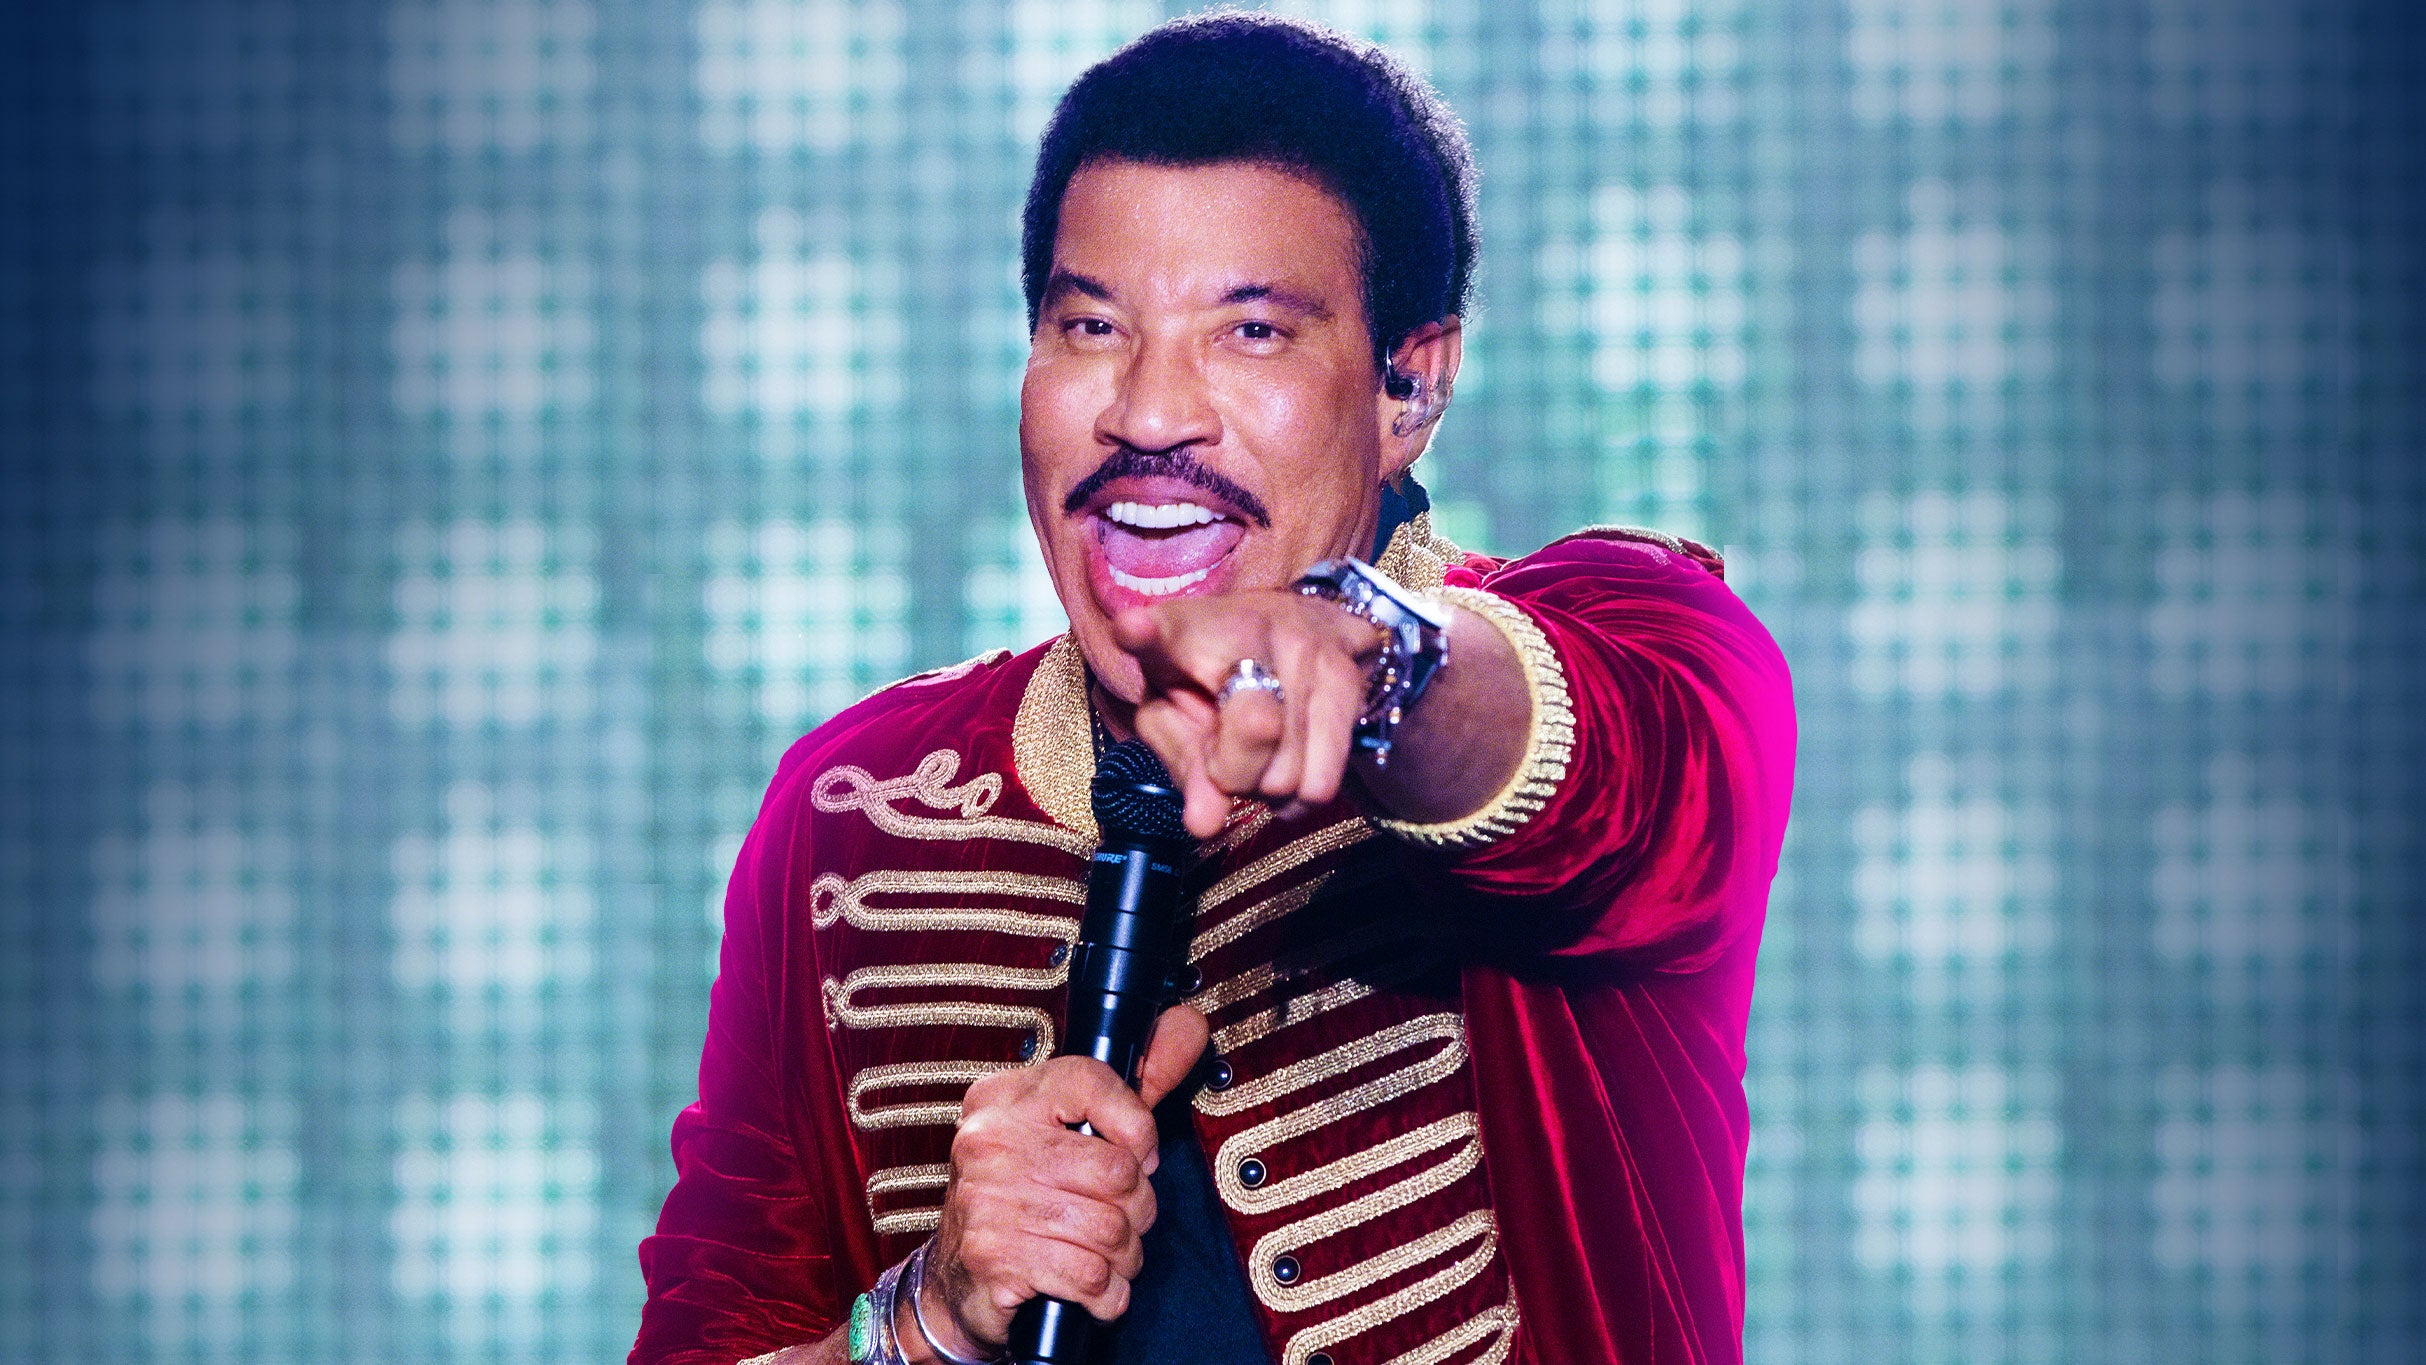 Lionel Richie And Earth, Wind & Fire - Sing A Song All Night Long free pre-sale pasword for early tickets in Toronto